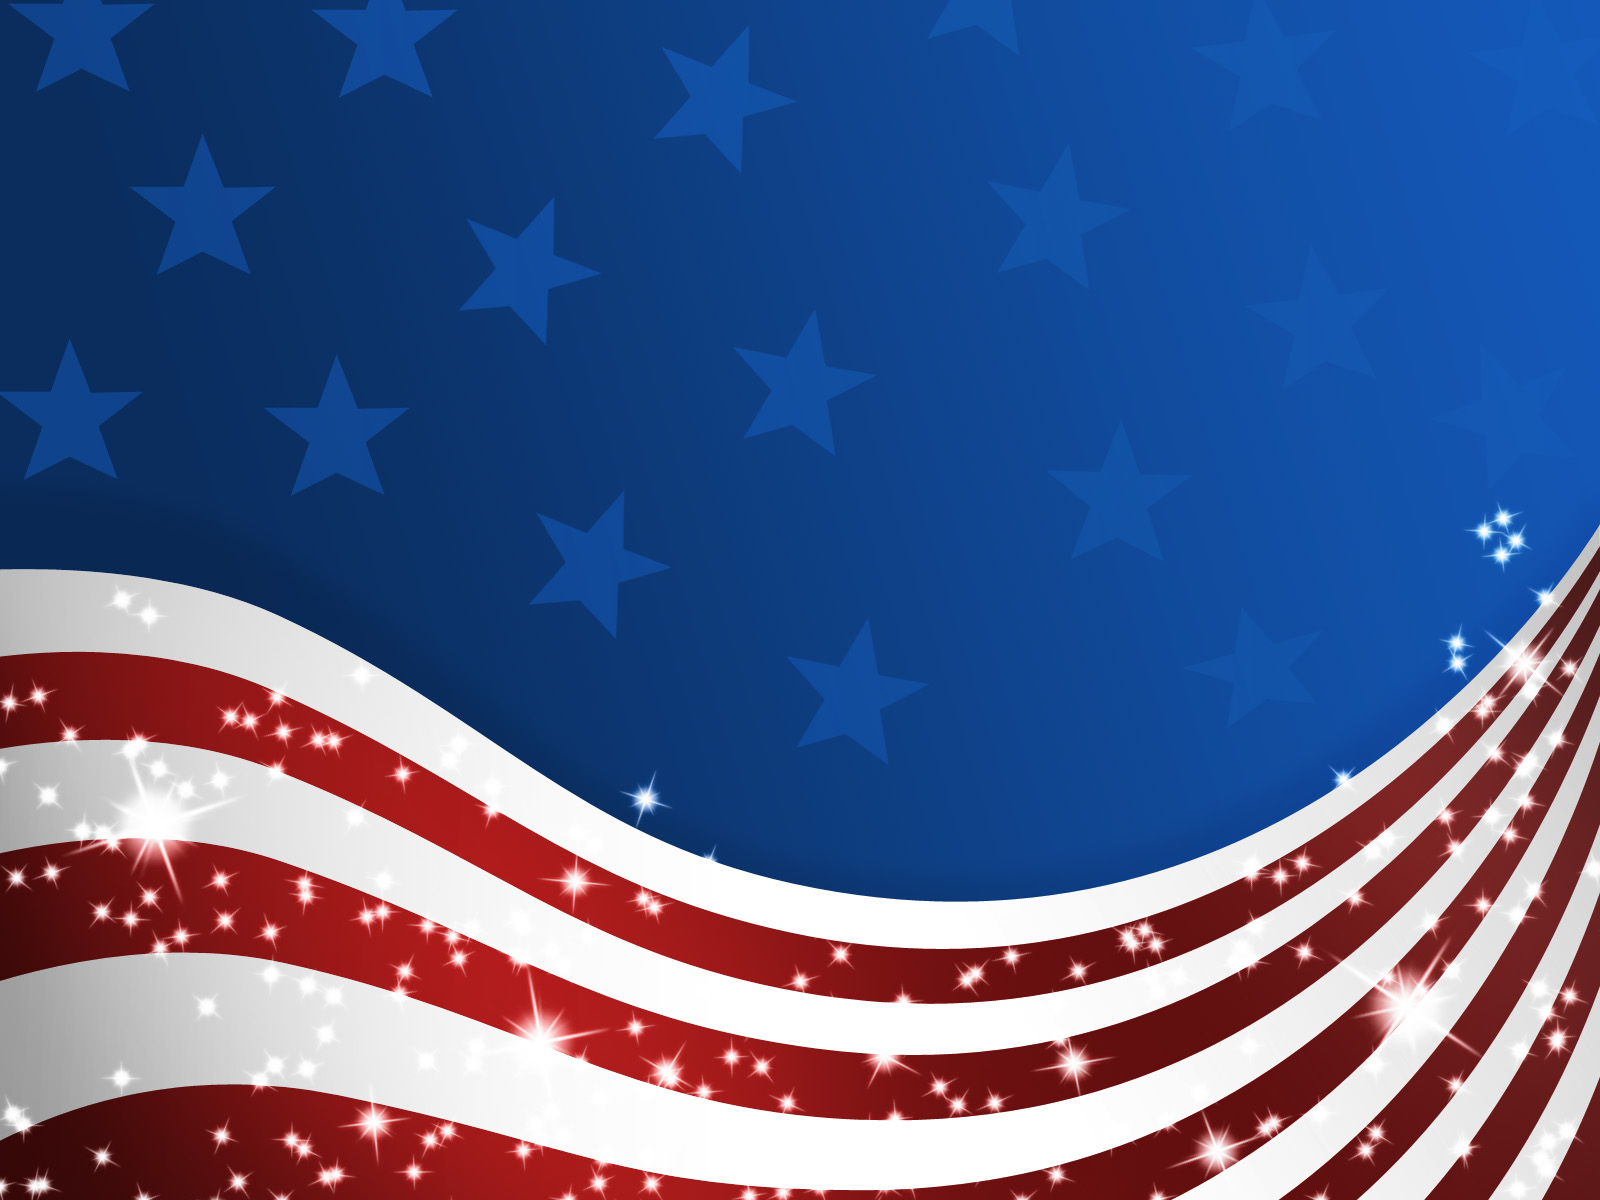 american-patriotic-flag-backgrounds-blue-flag-red-white-templates